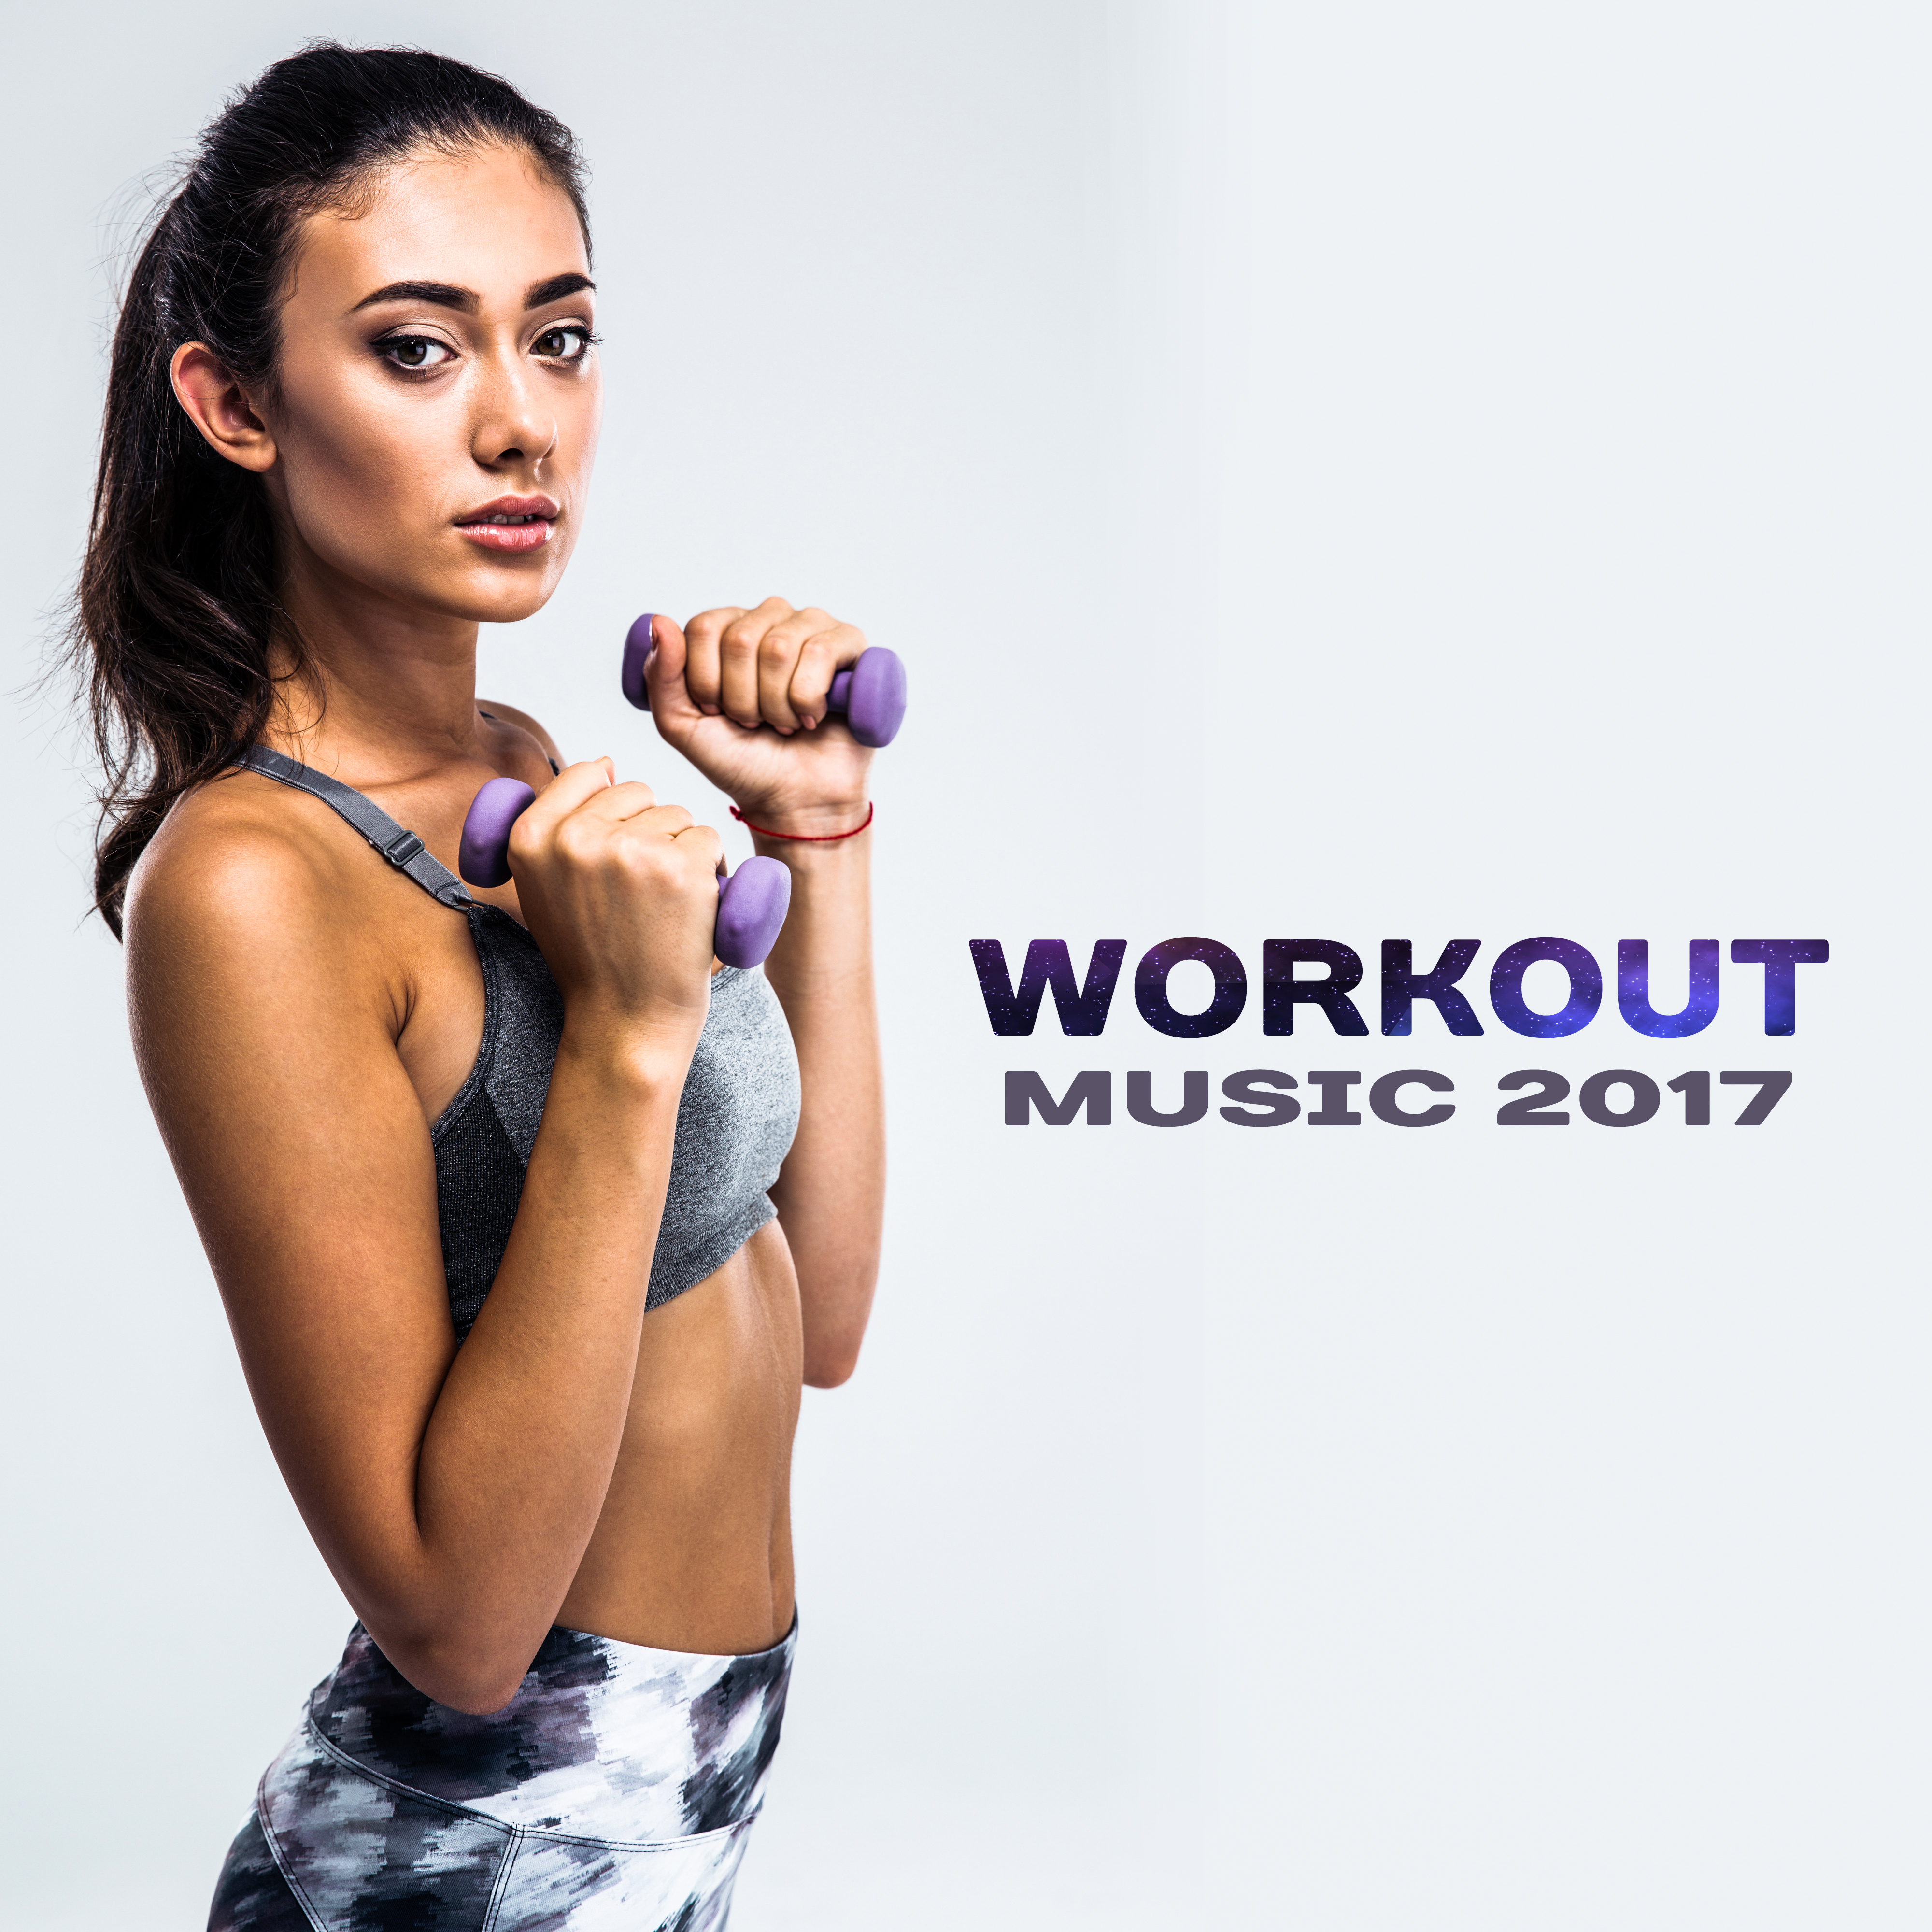 Workout Music 2017 – Chill Out Music for Running, Workout, Fitness, Training, Deep Beats, Chill Out 2017